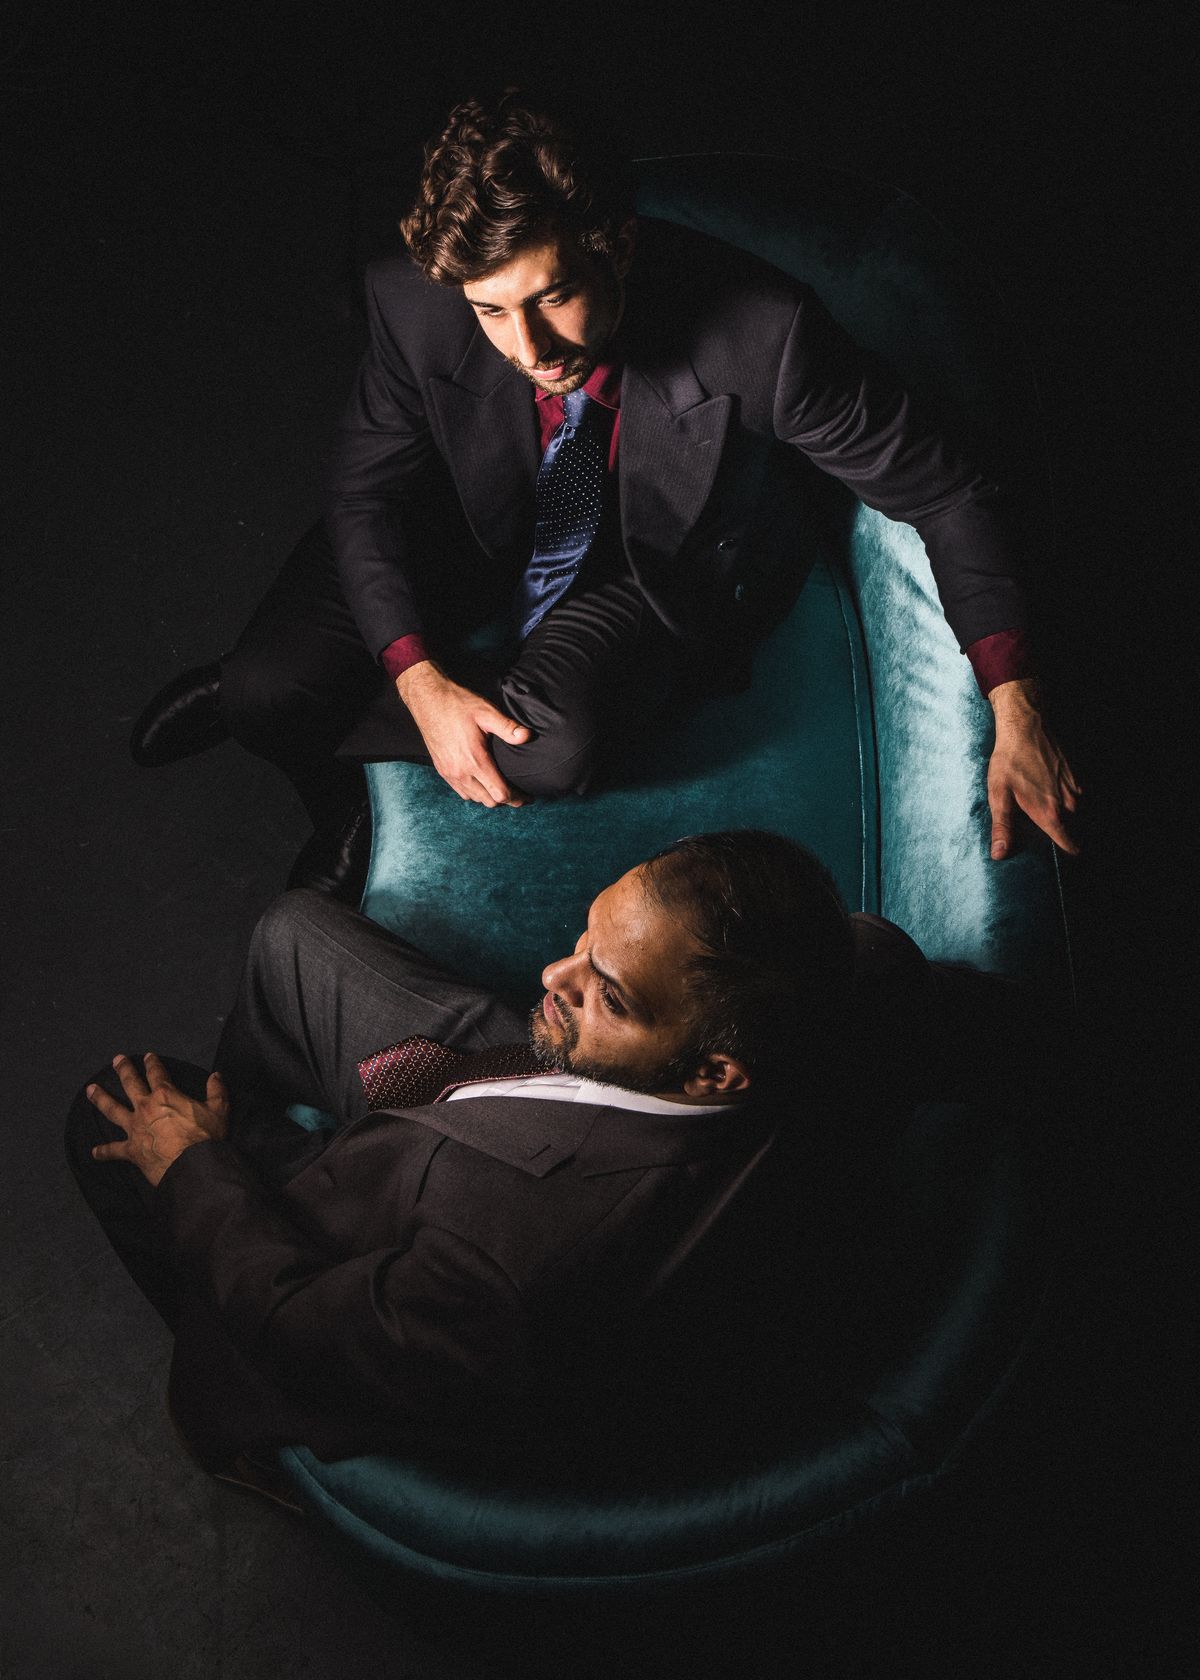 Israeli negotiator Uri Savir (Jed Feder, top) and Palestinian negotiator Ahmed Qurie (Anish Jethmalani), meet in secret to find common ground and bring about the 1993 Oslo Accords in TimeLine Theatre Company’s Chicago premiere production of J.T. Rogers’ T